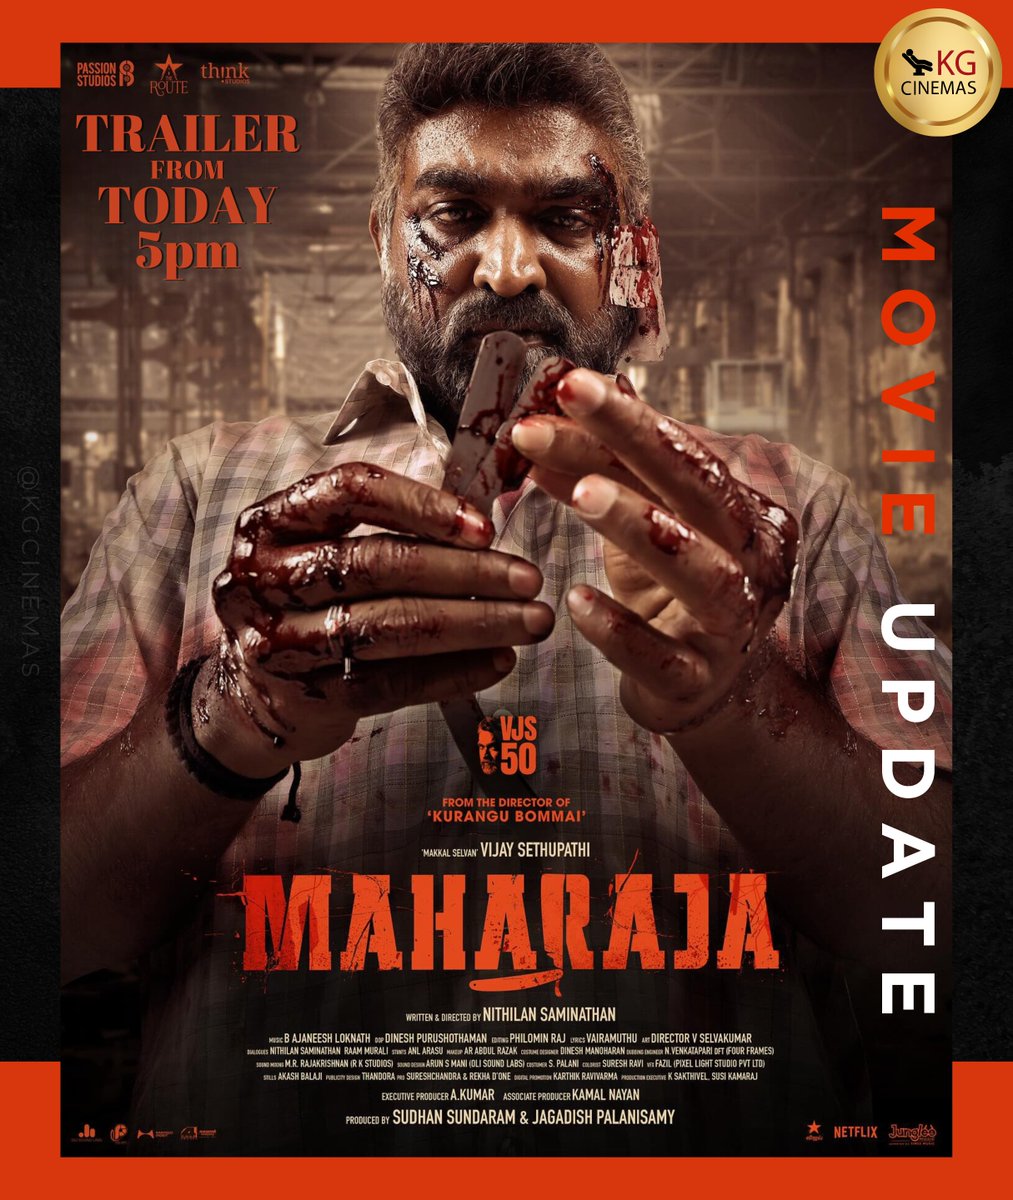 🎬 Don't miss it! The #Maharaja trailer releases today at 5 PM! Starring Vijay Sethupathi and directed by @Dir_Nithilan, get ready for a rollercoaster of emotions and action! 🍿 #TrailerLaunch #VijaySethupathi #DirNithilan #Mamtamohan